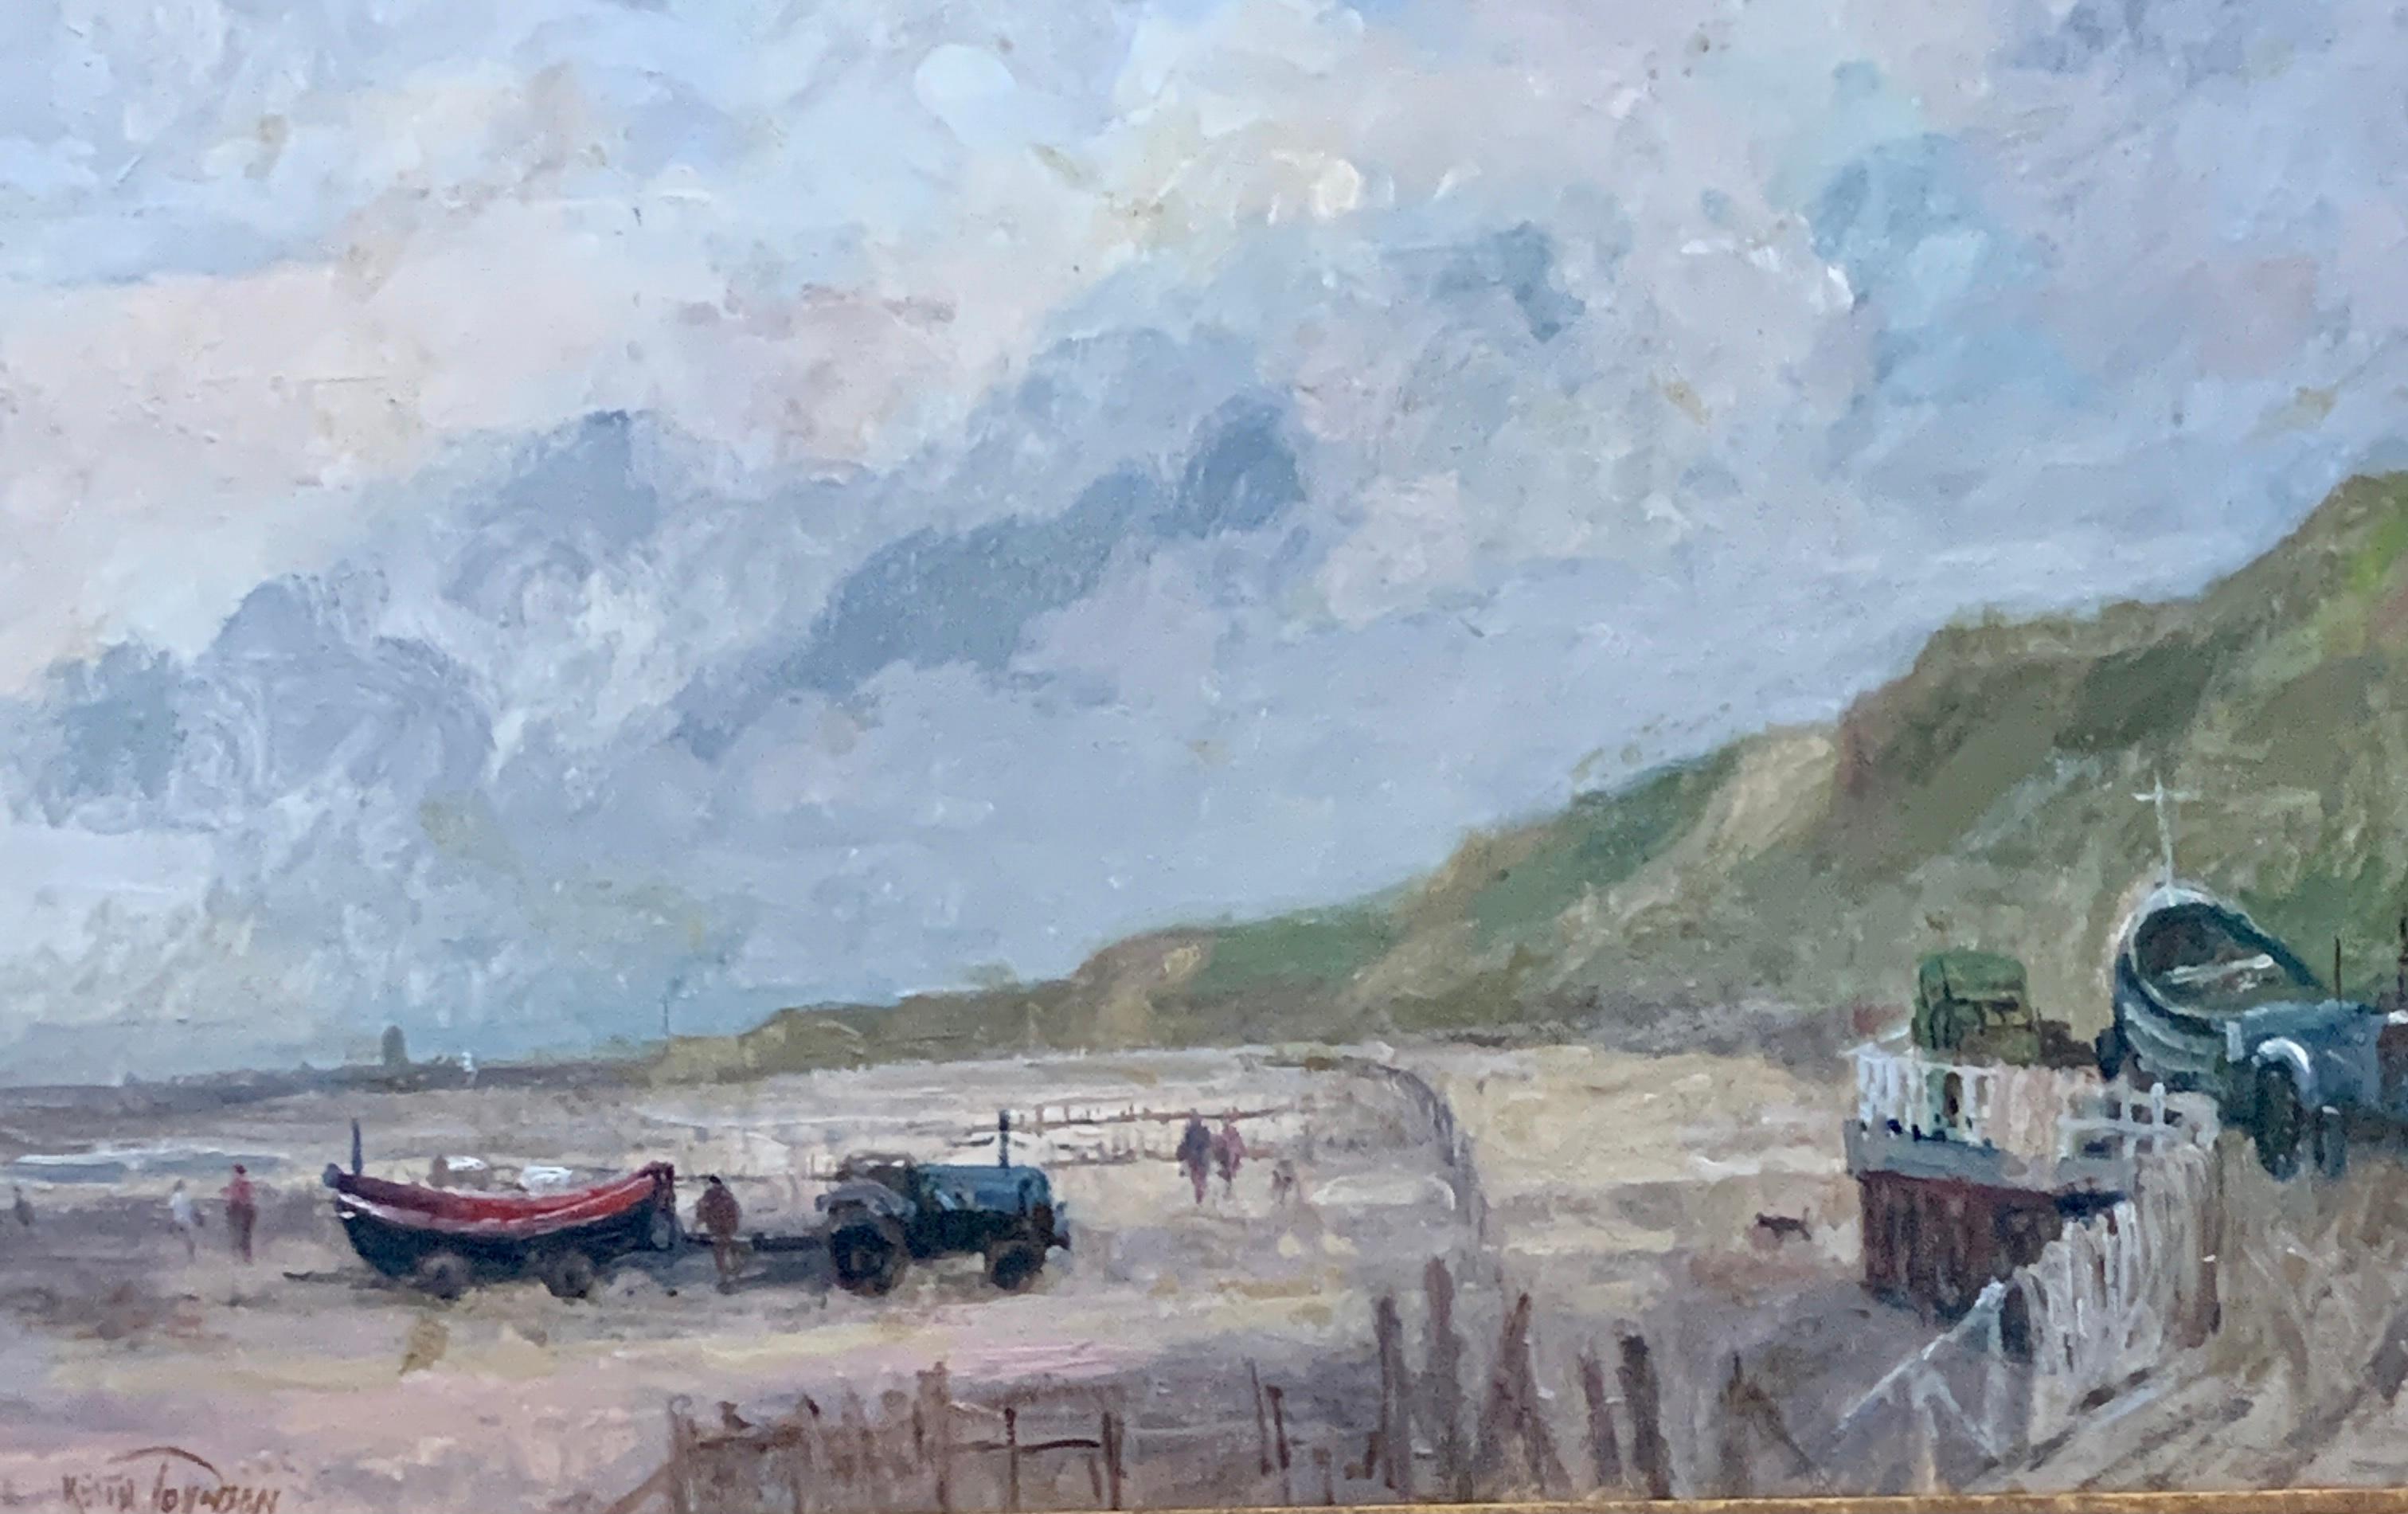 English Impressionist 20th century beach scene with tractor, fishing boats. - Painting by Keith Johnson